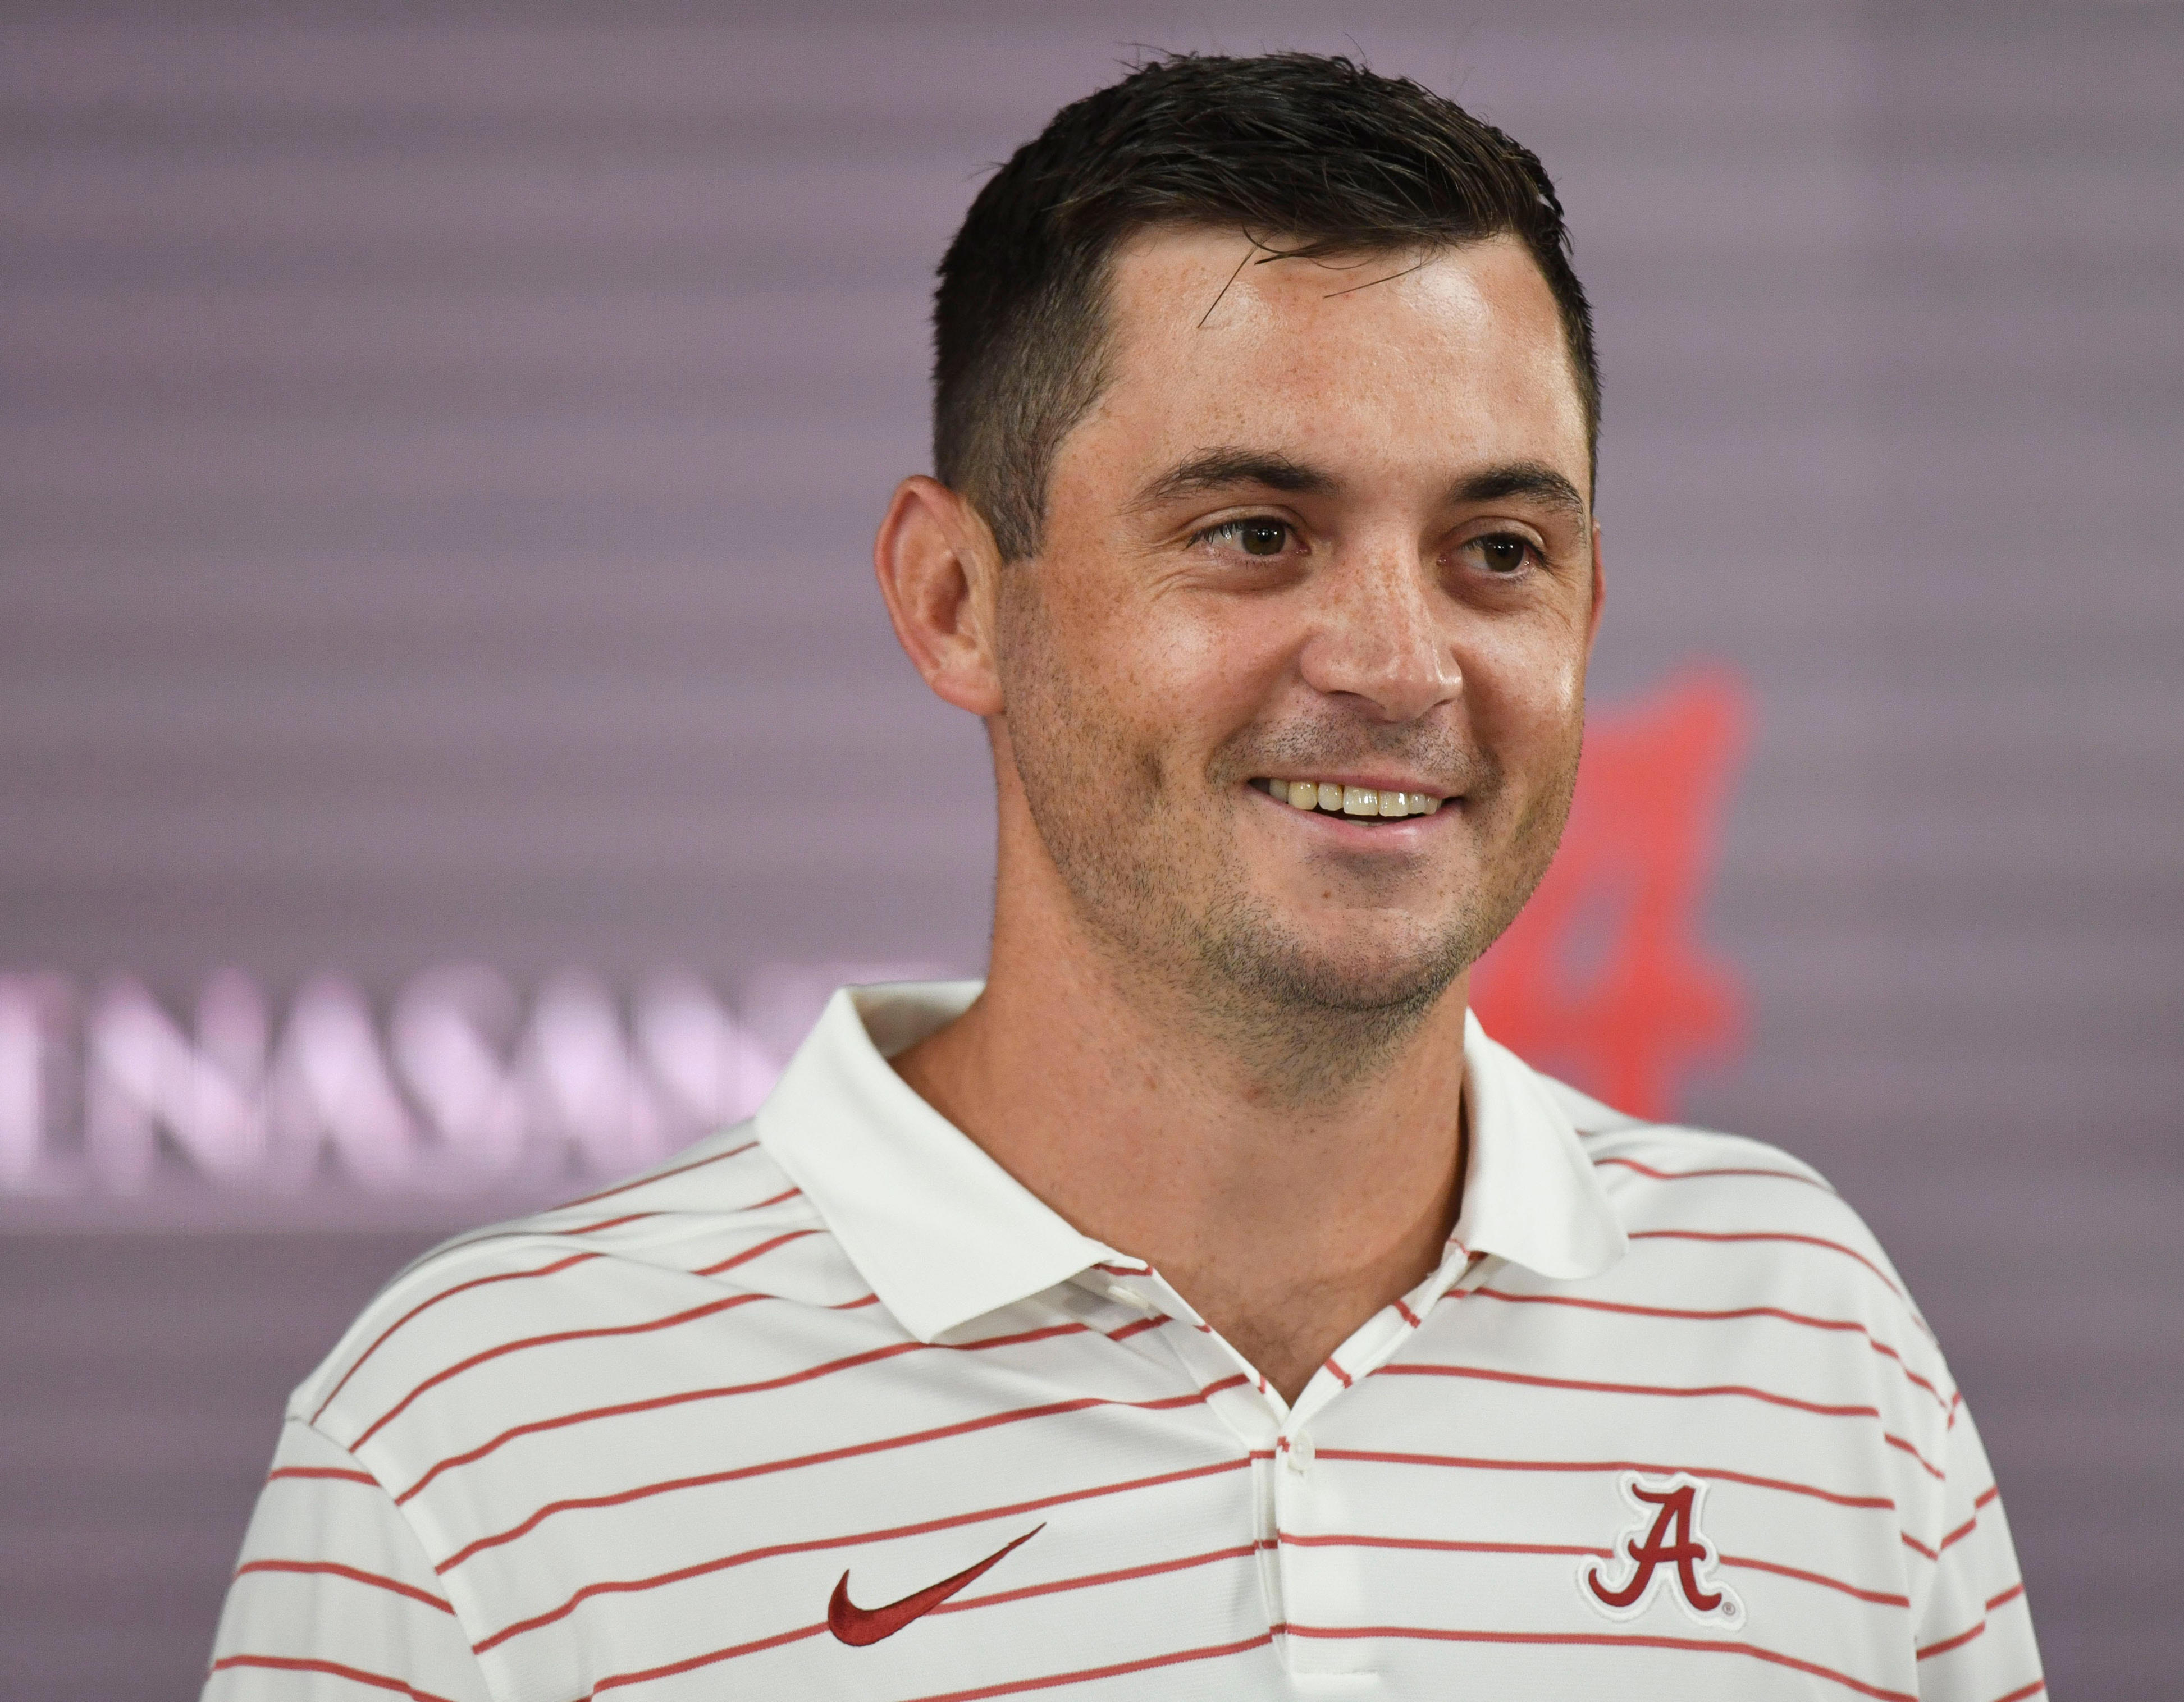 What will Alabama football depth chart look like in season opener? Our